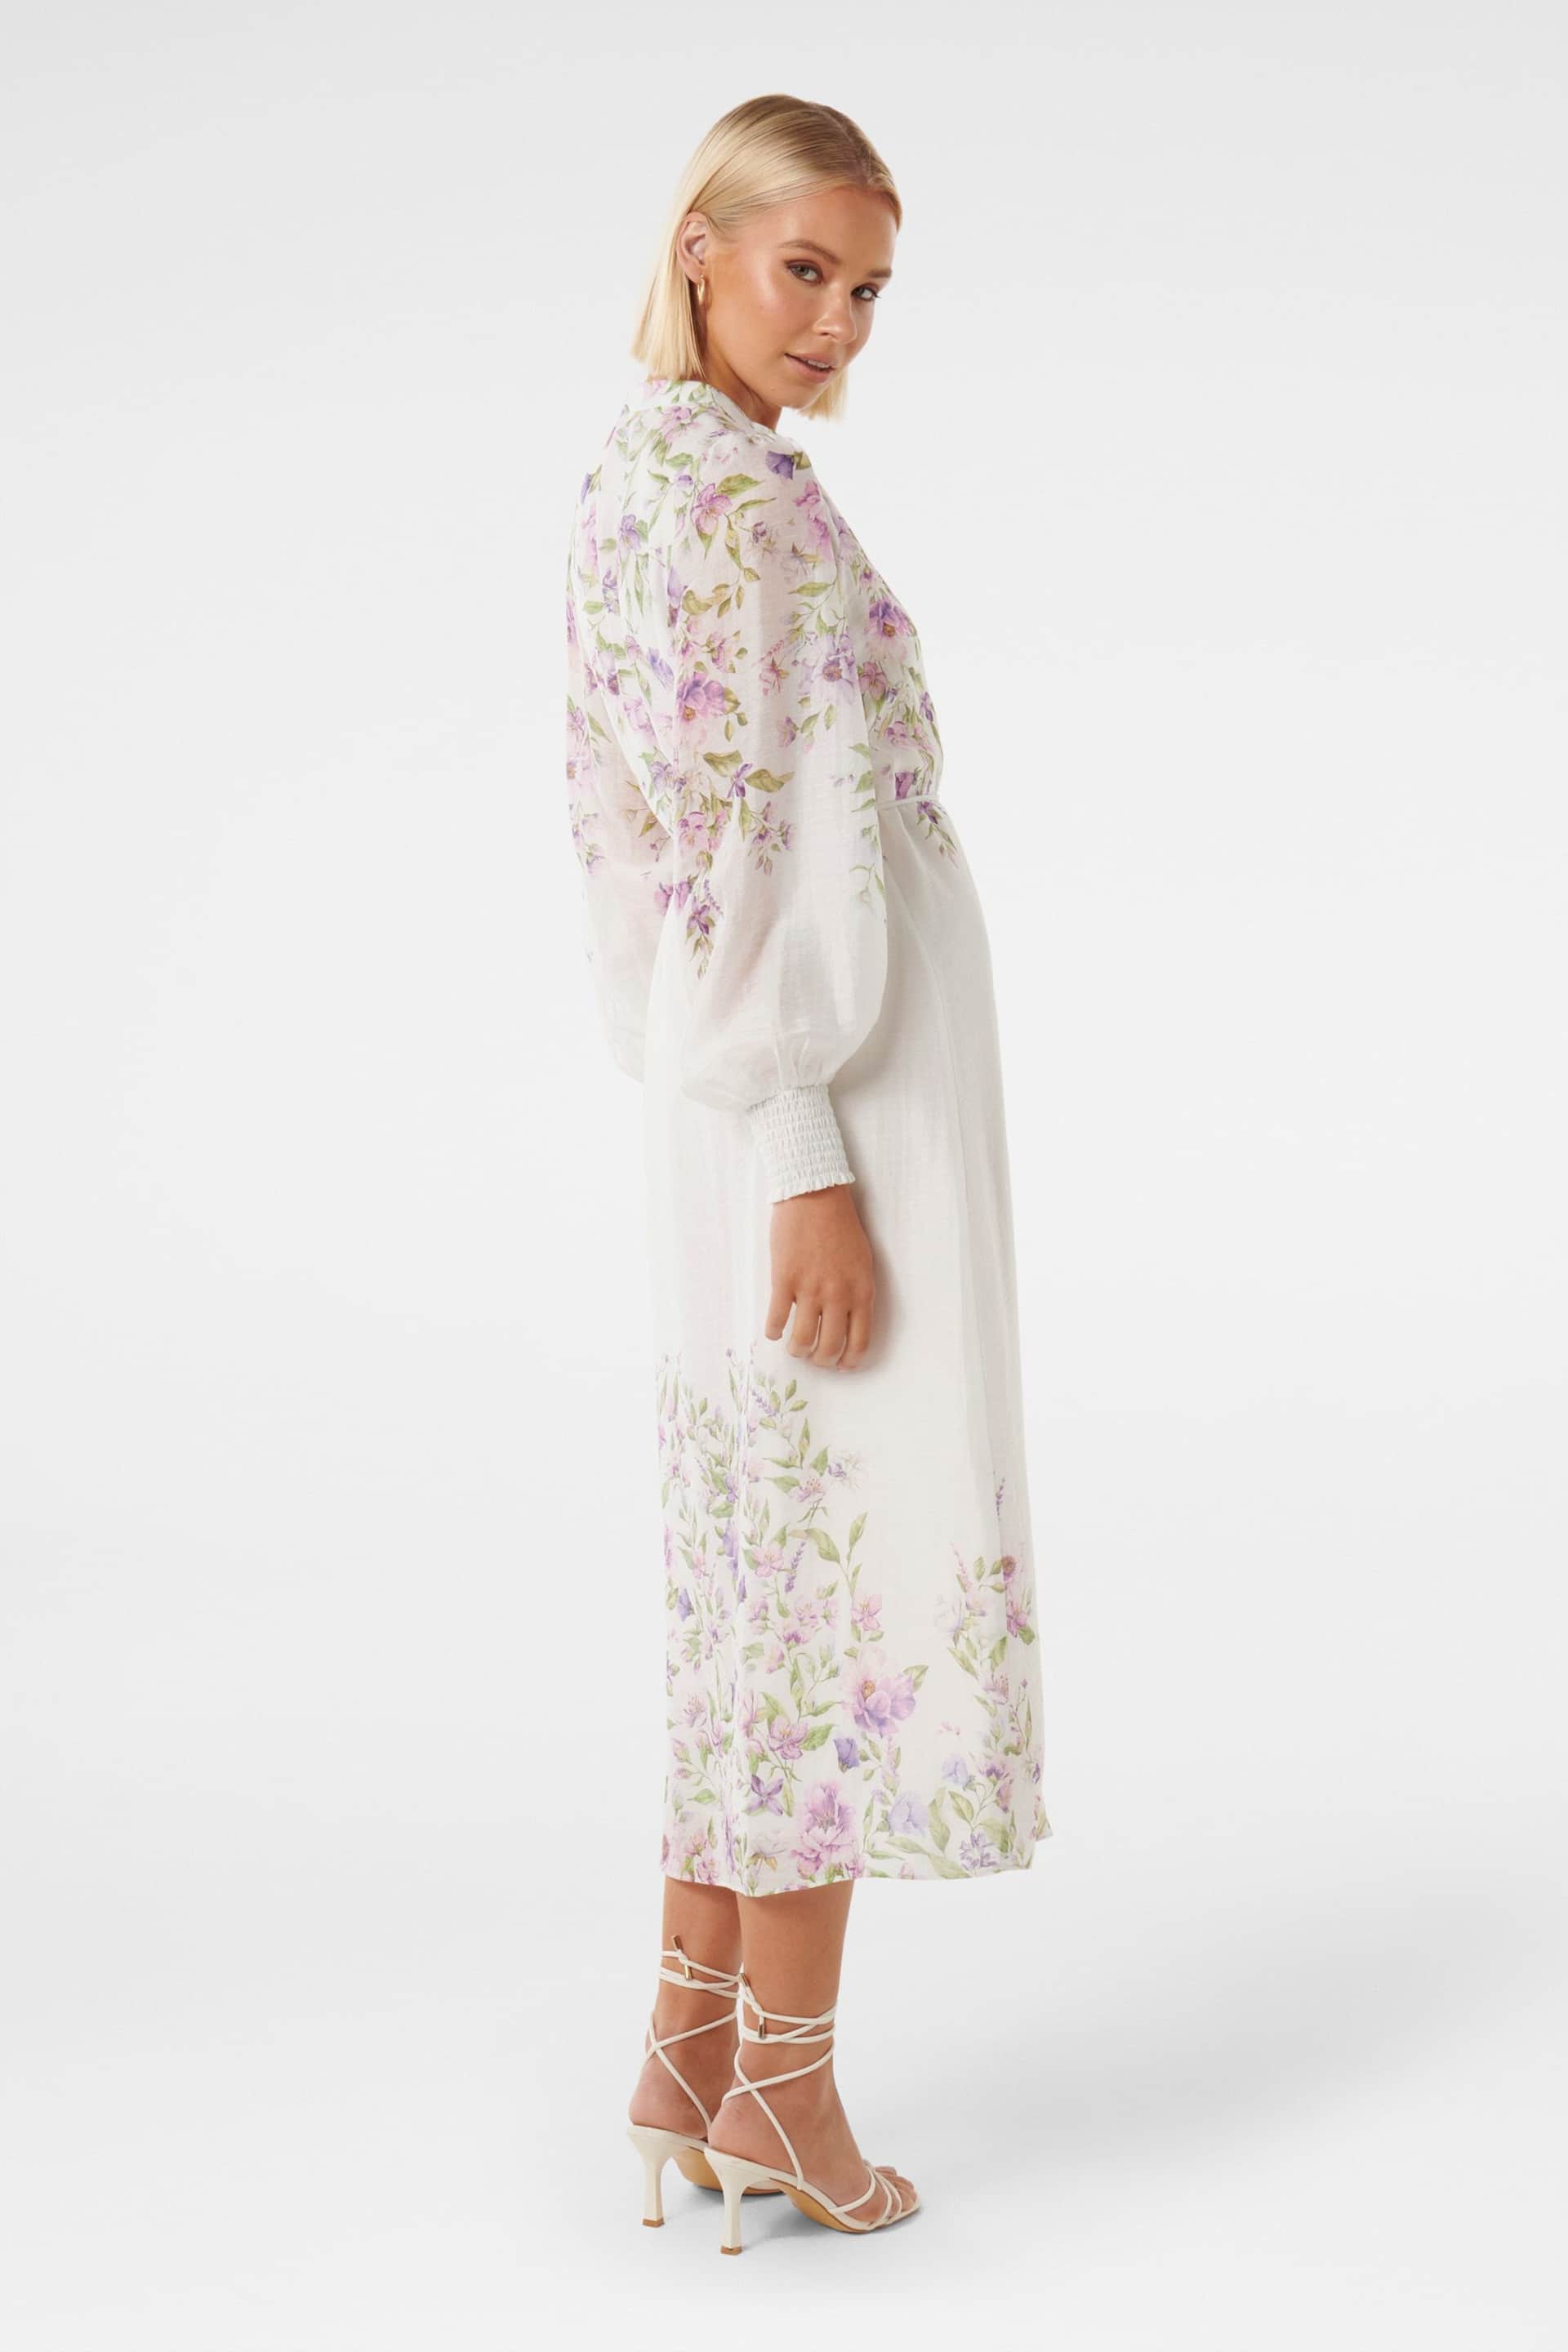 Forever New White Olympia Printed Shirt Dress contains Linen - Image 2 of 4